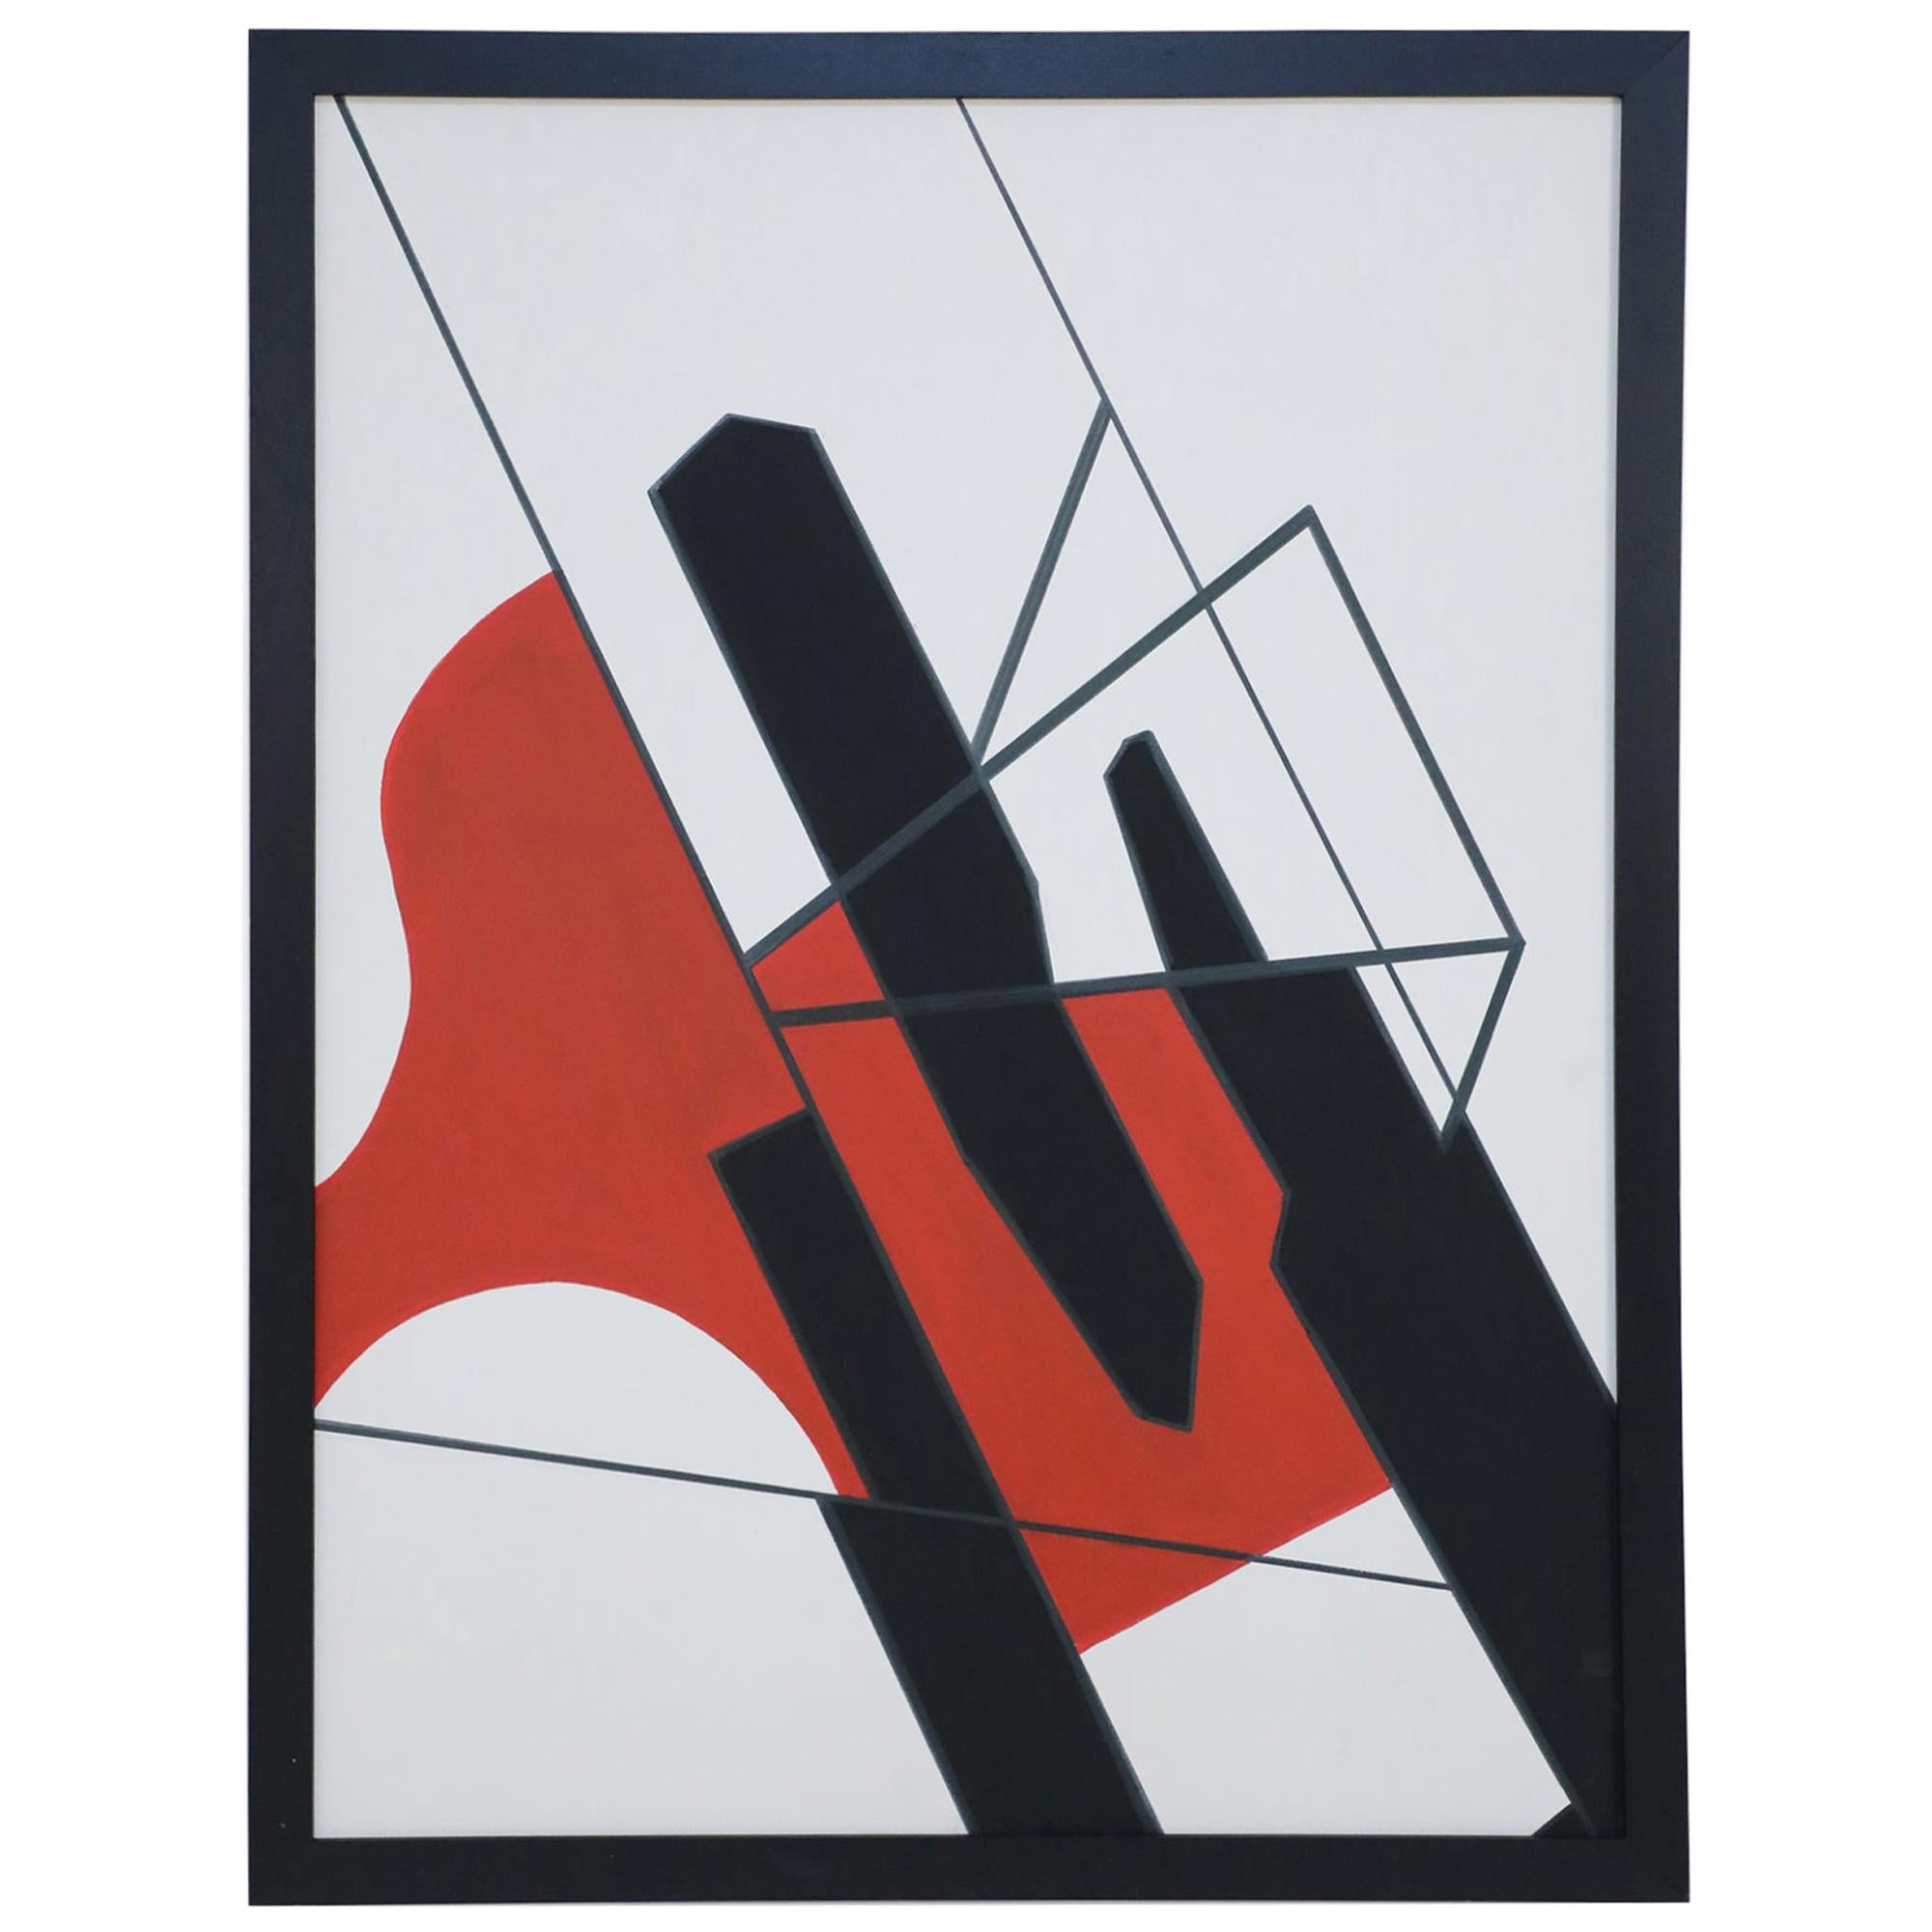 Framed Acrylic Abstract Painting of Geometric Shapes in Black, Red, and White